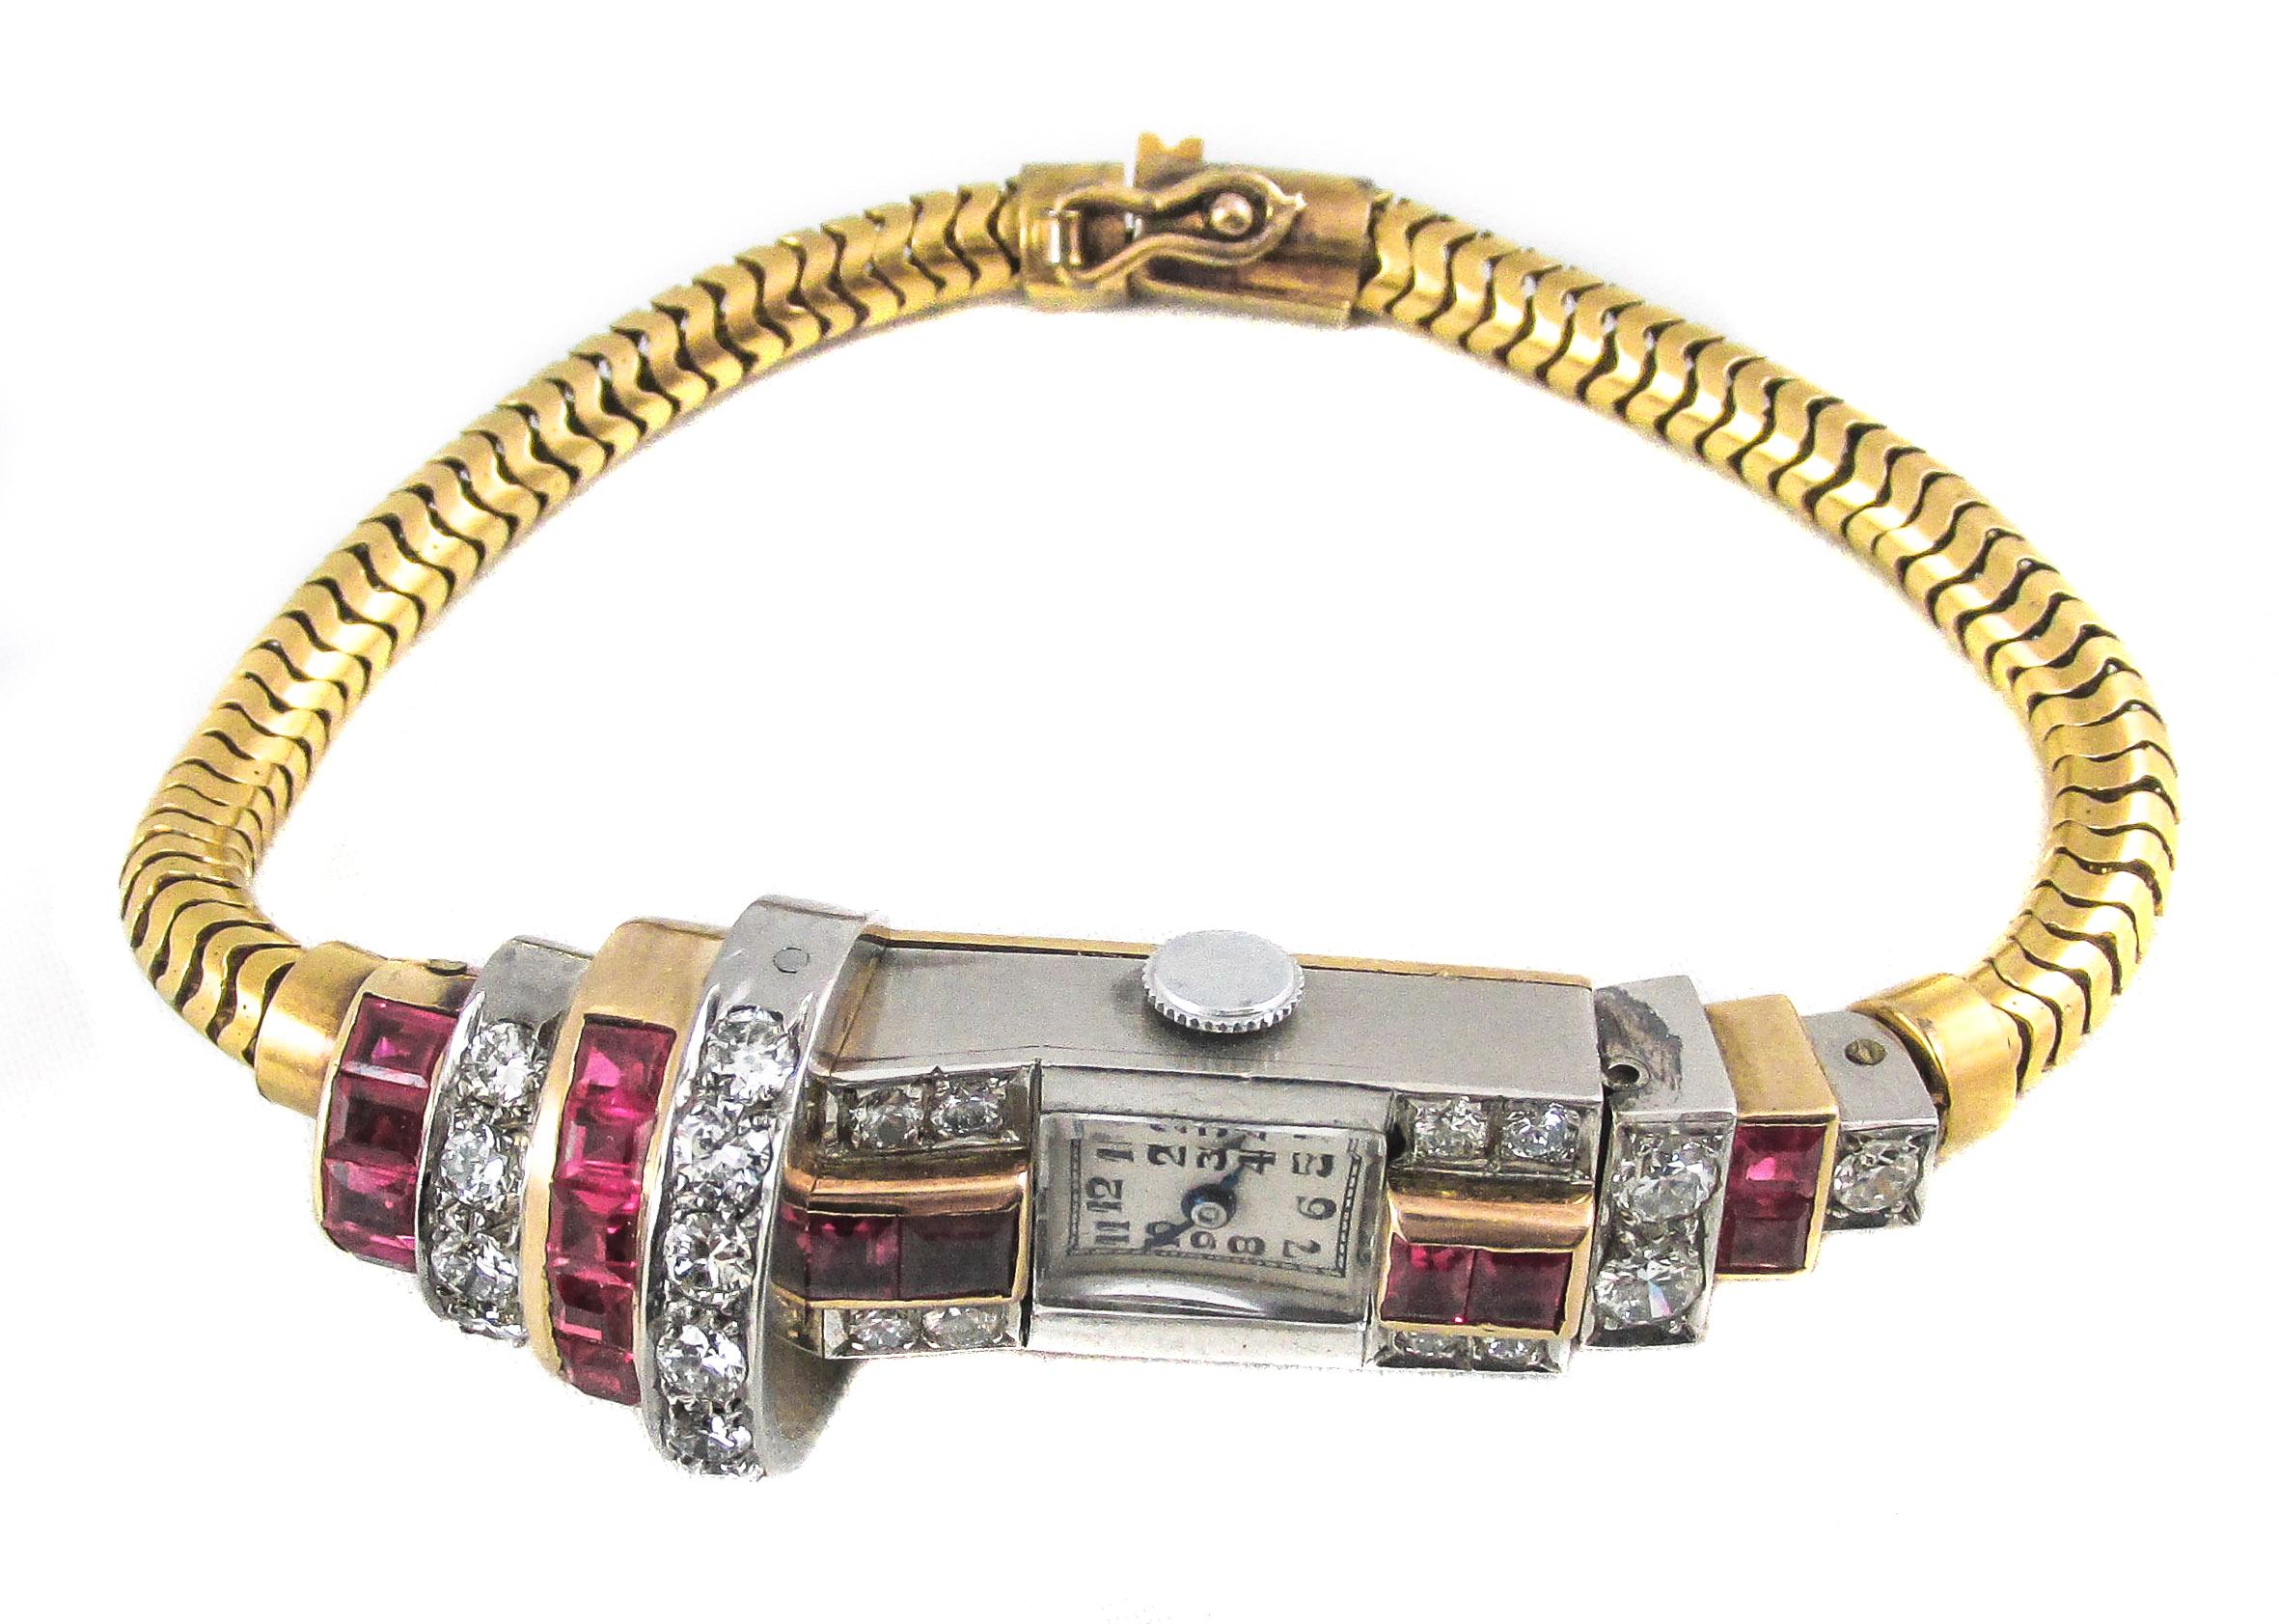 This unique Retro 1940s ladies wristwatch is designed with alternating discs of rubies set in yellow gold and round brilliant cut diamonds set in platinum, graduating in size and are flexibly connected to the case and movement which is embellished